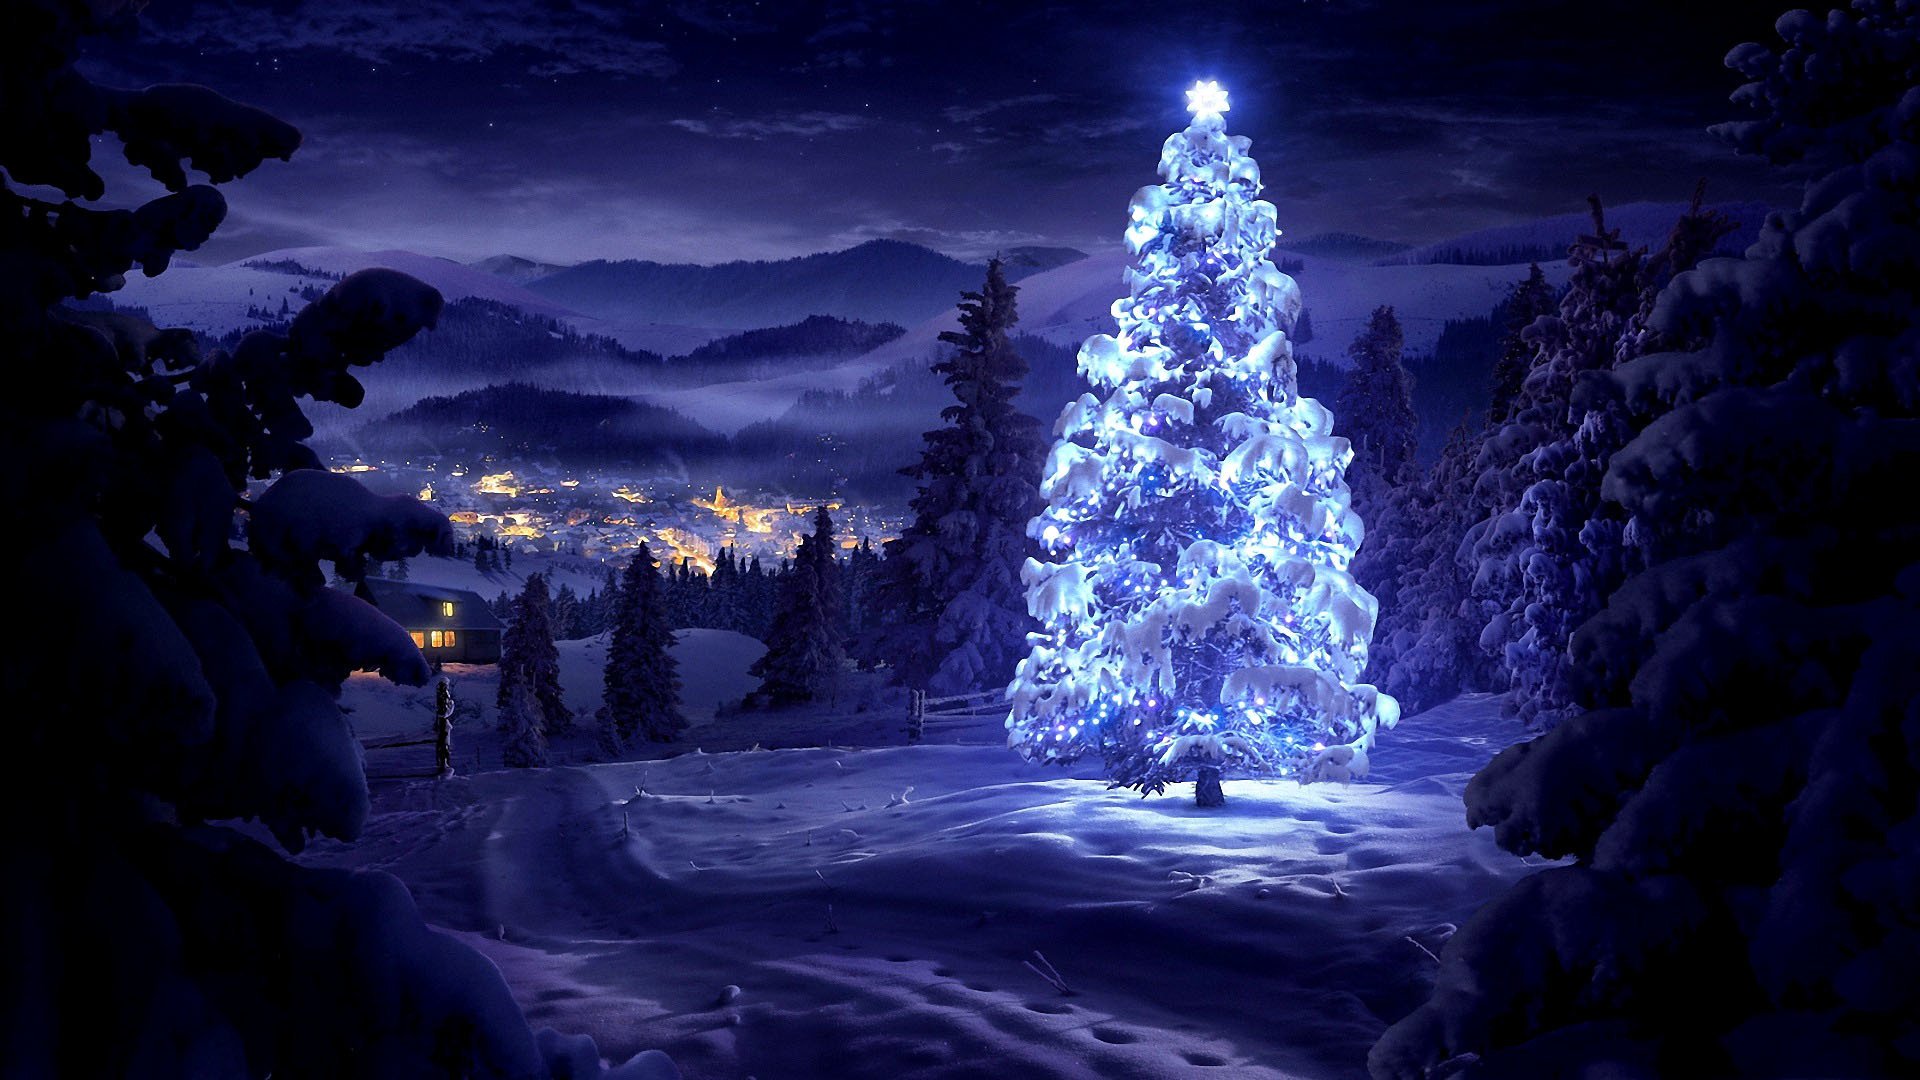 Aesthetic Christmas Wallpapers HD Free download 